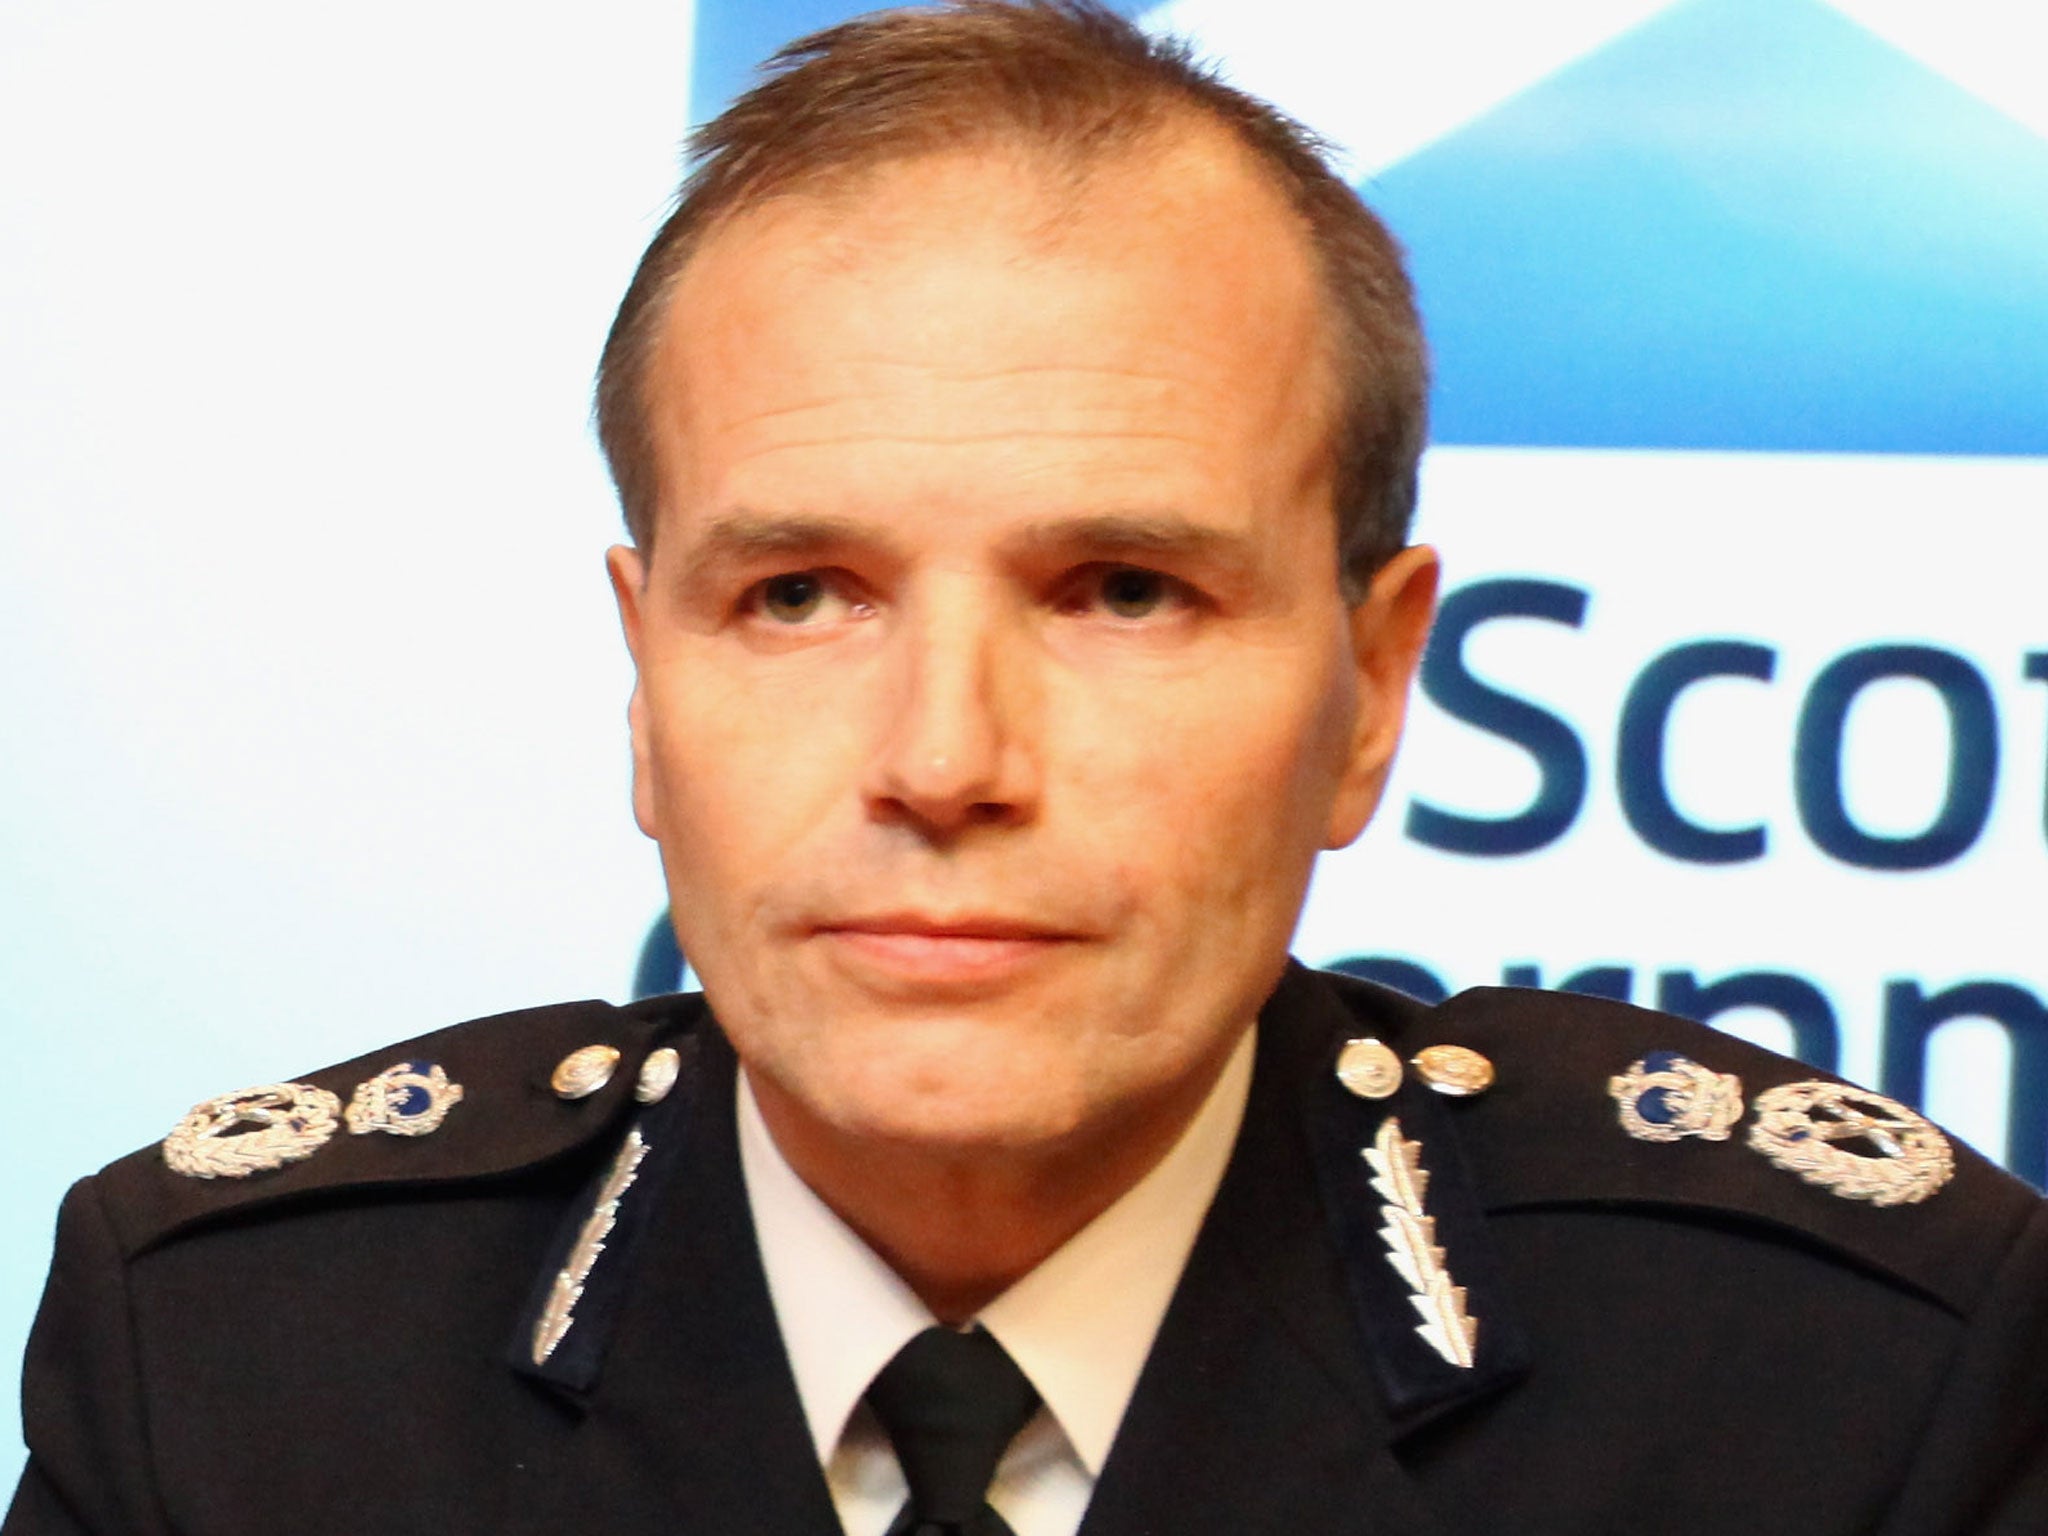 Chief Constable Stephen House told the Association of Scottish Police Superintendents conference that he is struggling to balance his budget